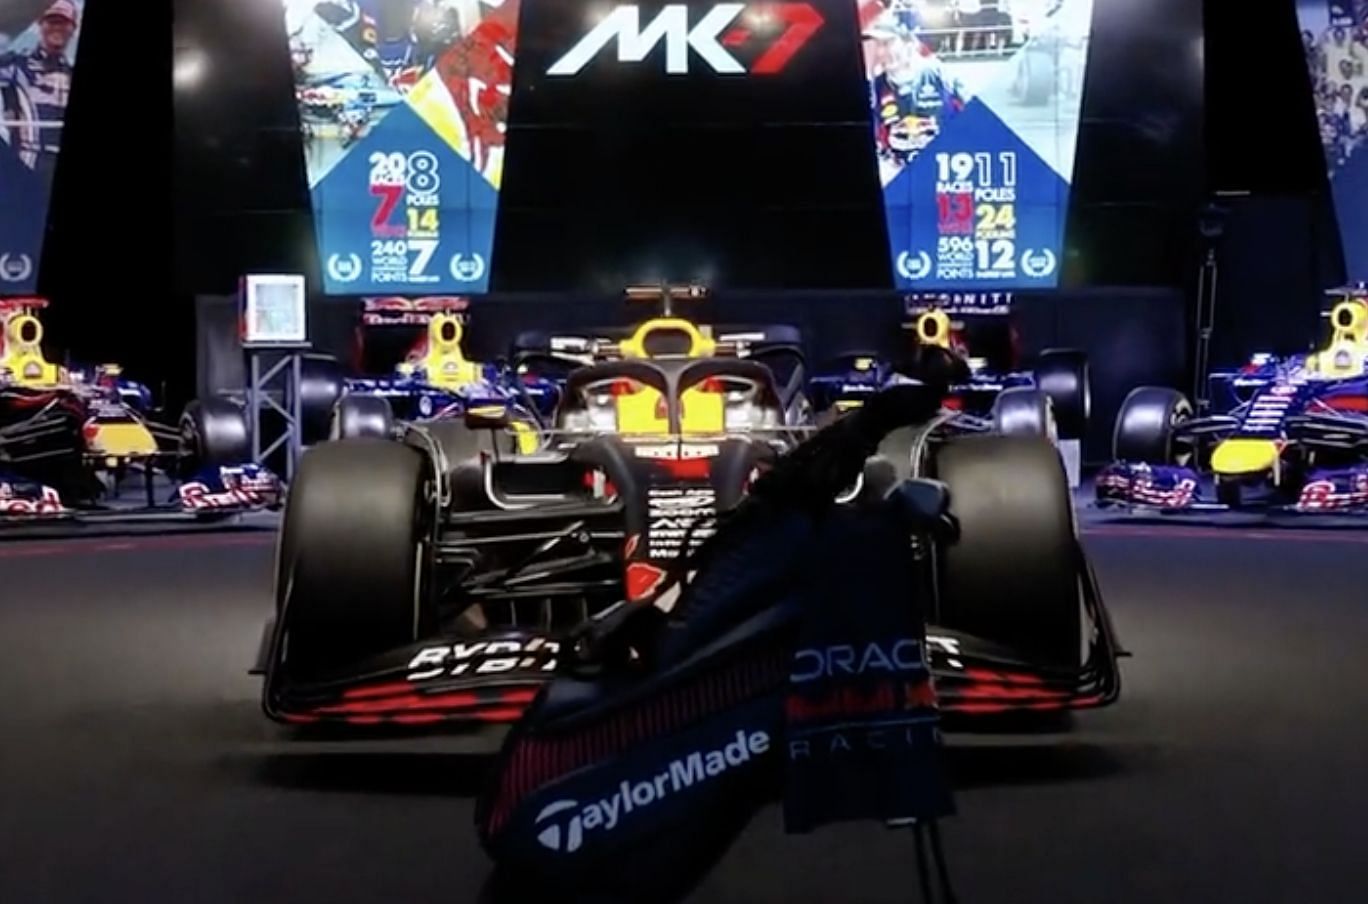 Red Bull racing and TaylorMade collaboration (Image via Twitter)